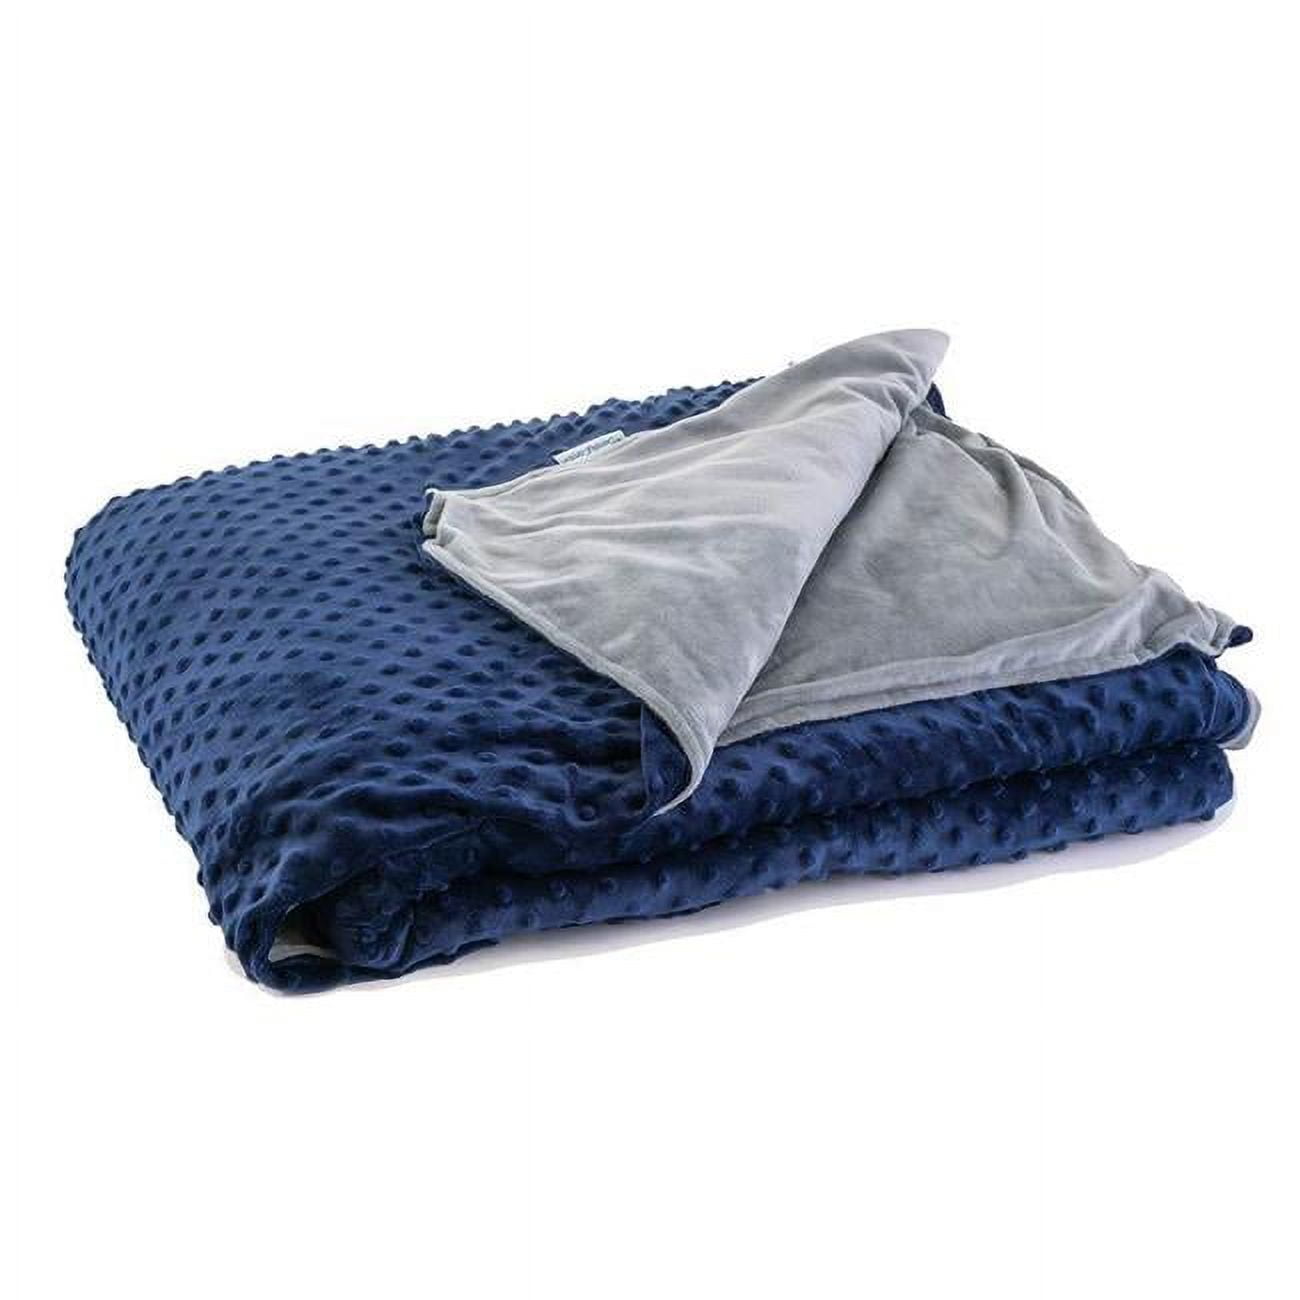 Dcwb3648-5-gryblumdc-ws 36 X 48 In. 5 Lbs Kids Weighted Blanket Minky Cover - Navy & Gray